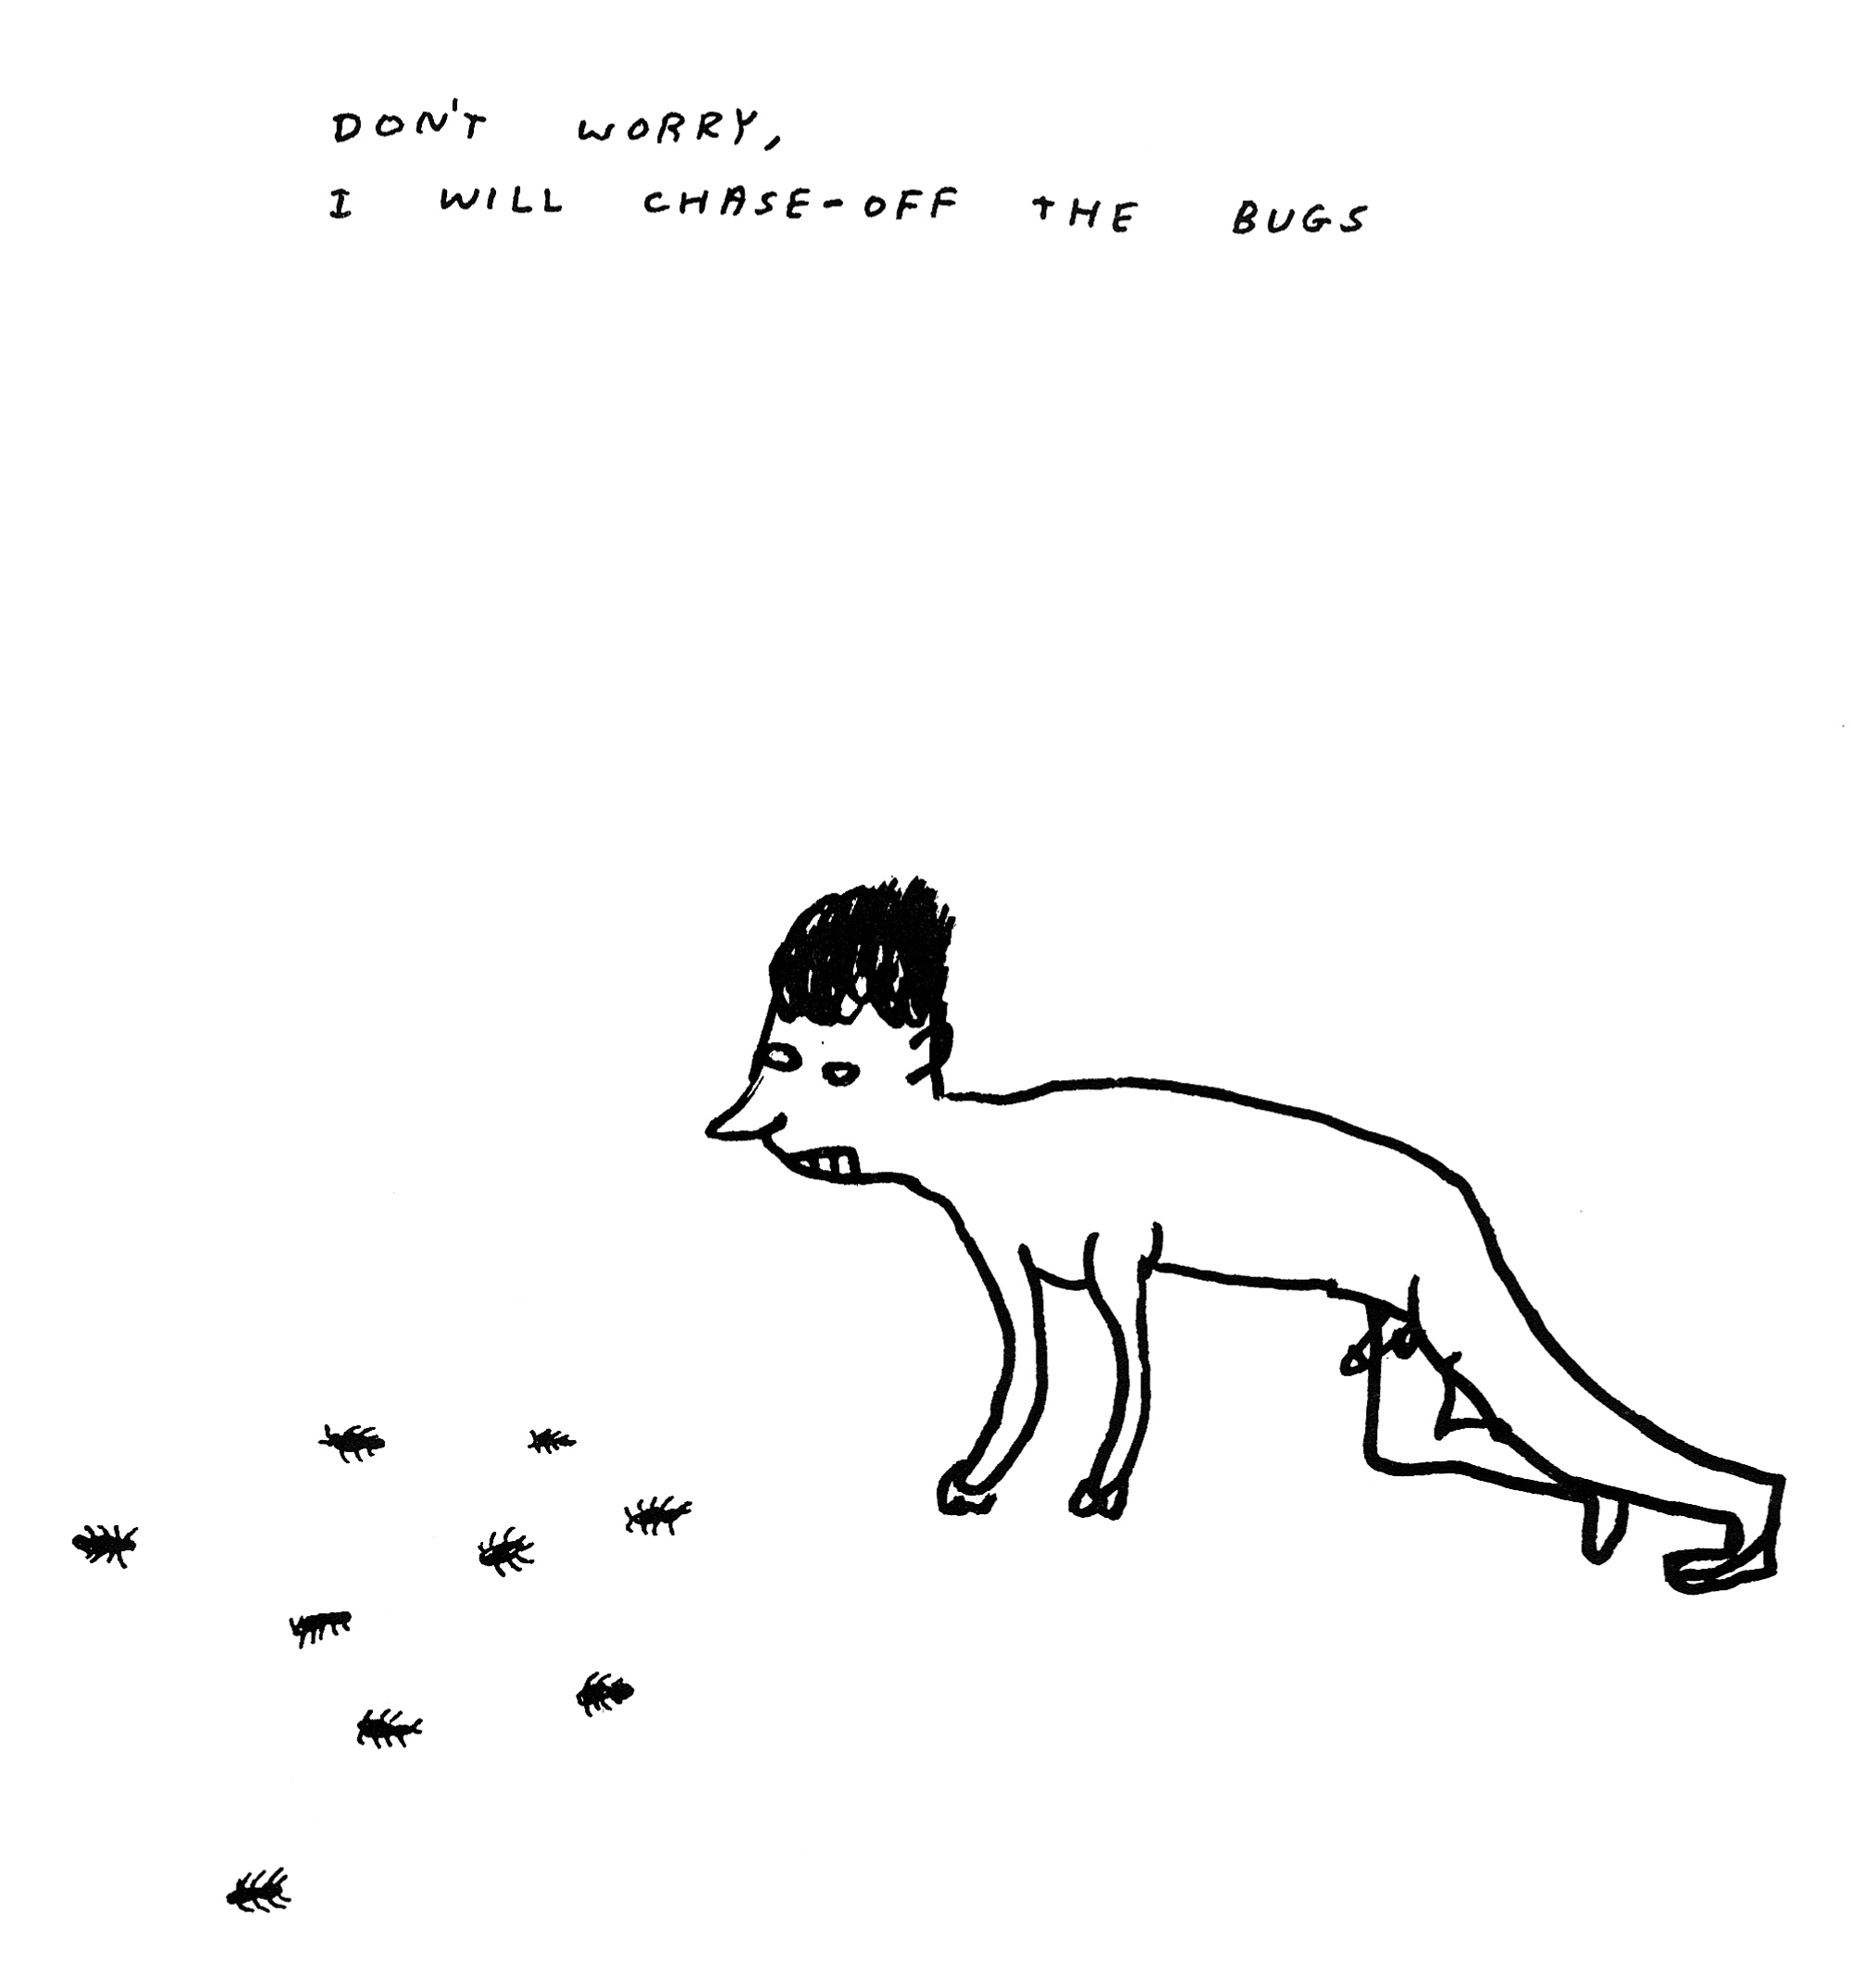 An untitled 2000 drawing by David Shrigley.